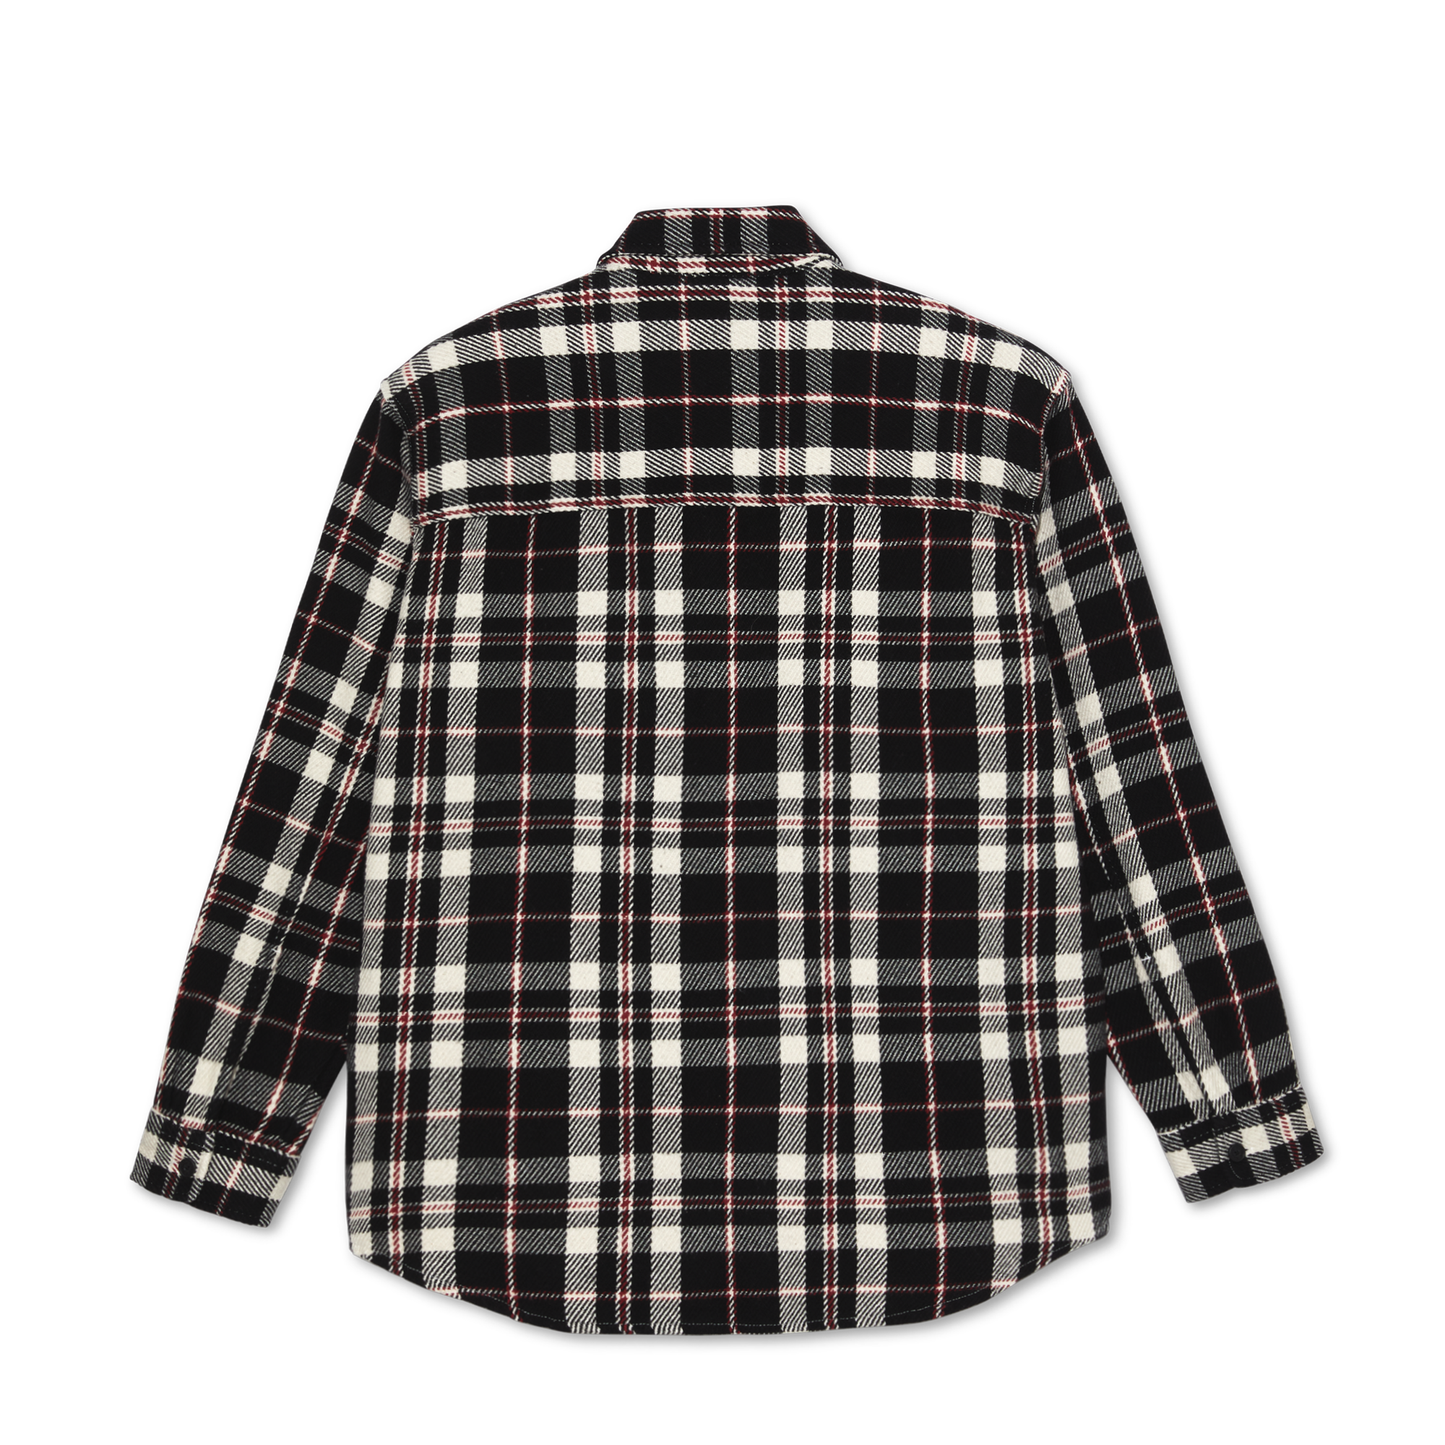 POLAR SKATE CO BIG BOY OVER SHIRT FLANNEL BLACK CLOUD WHITE AND RED